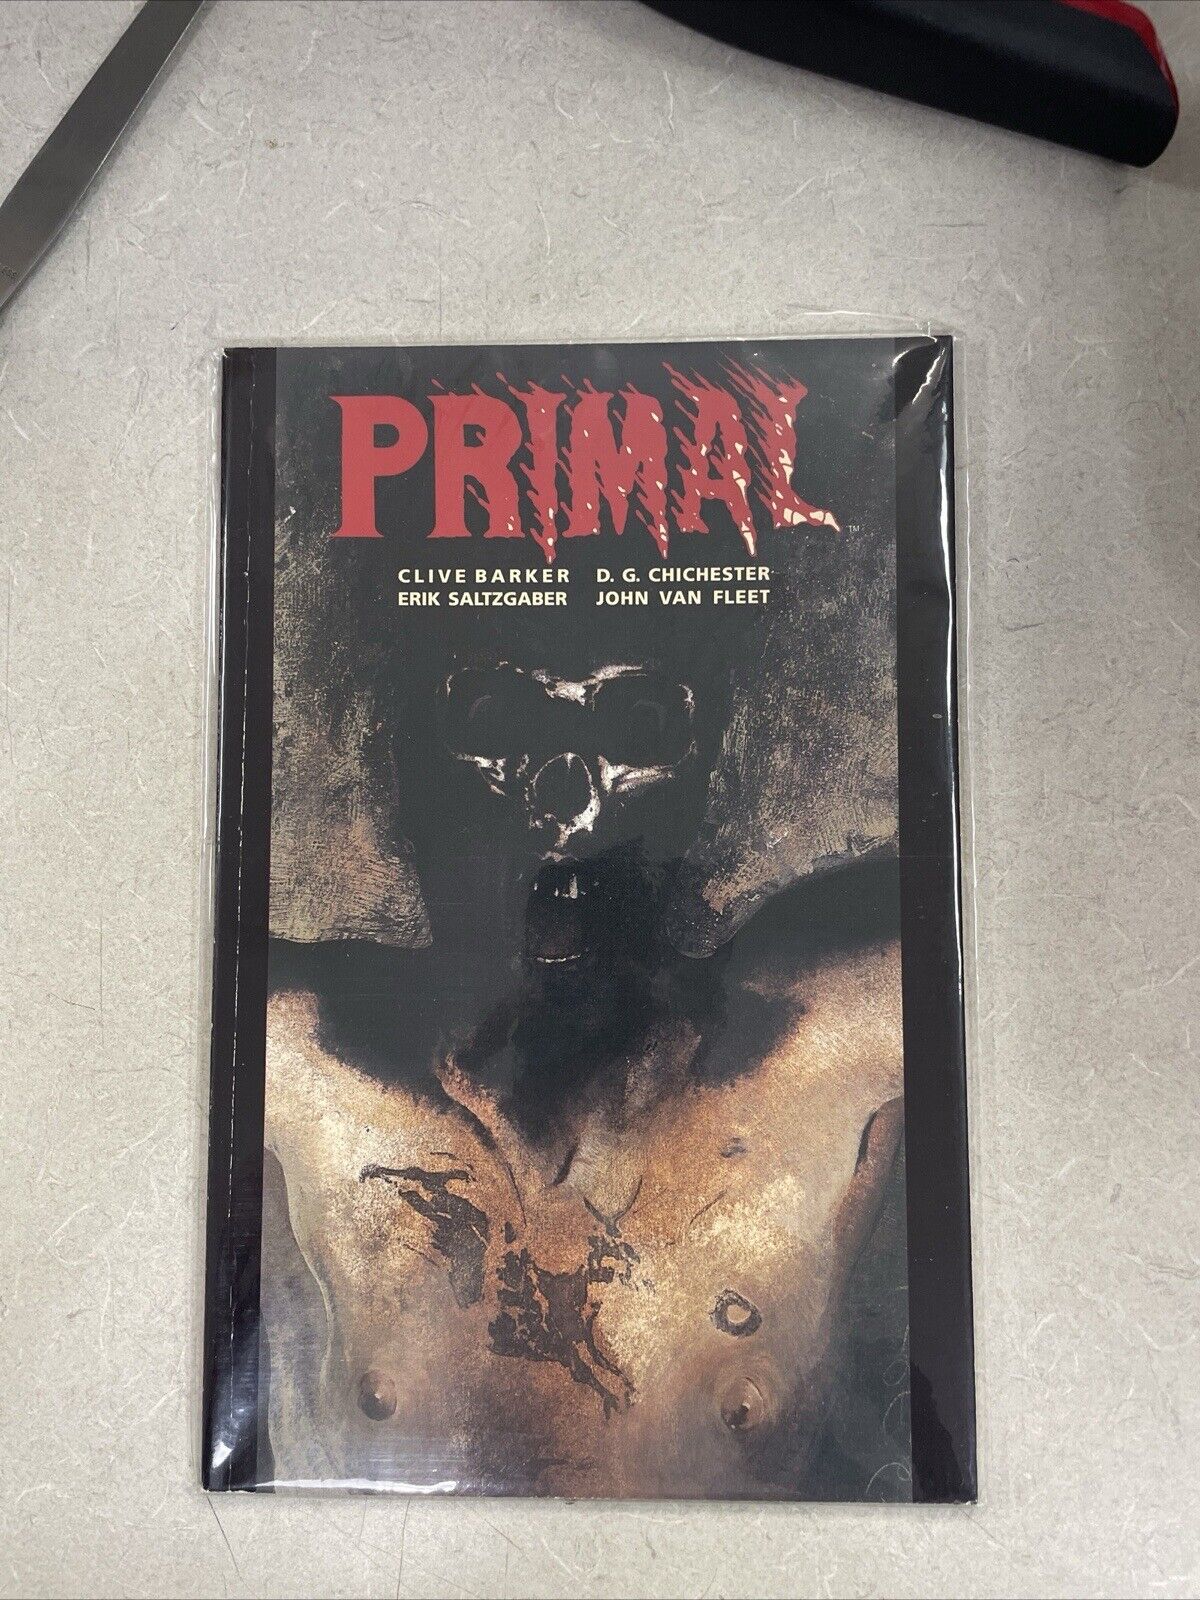 Primal From the Cradle to the Grave GN #1 1992 Dark Horse Clive Barker